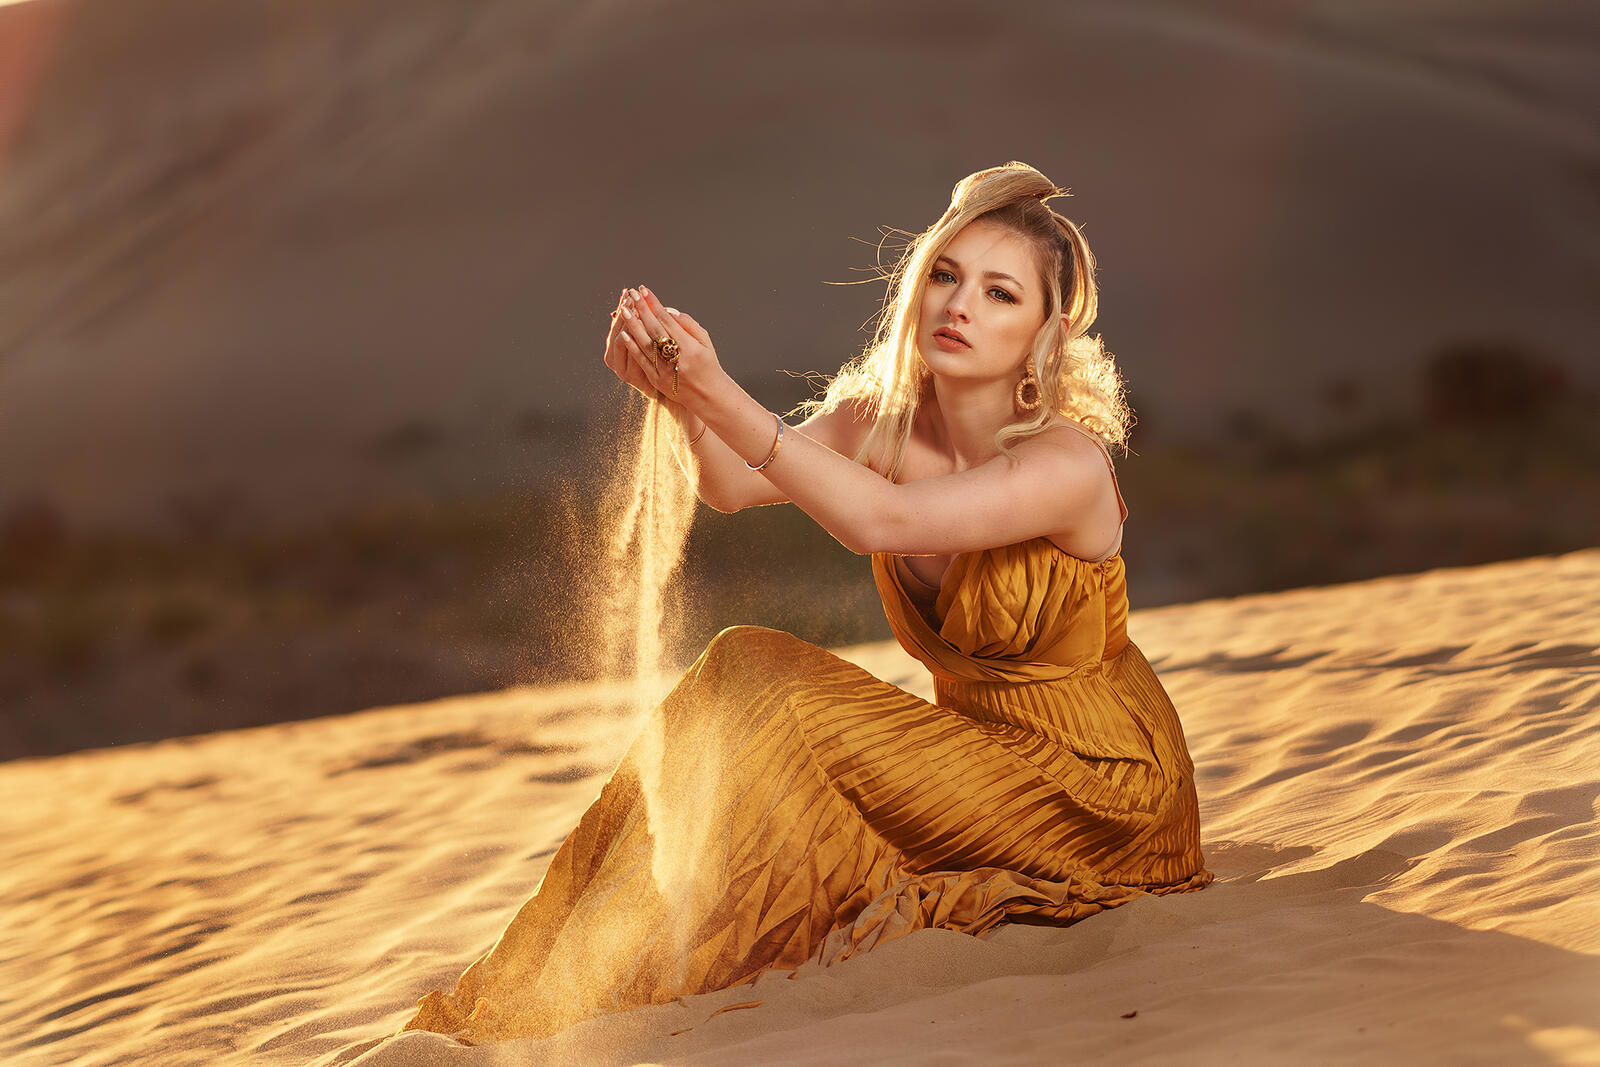 Free photo The blonde in the desert pours sand out of her hands